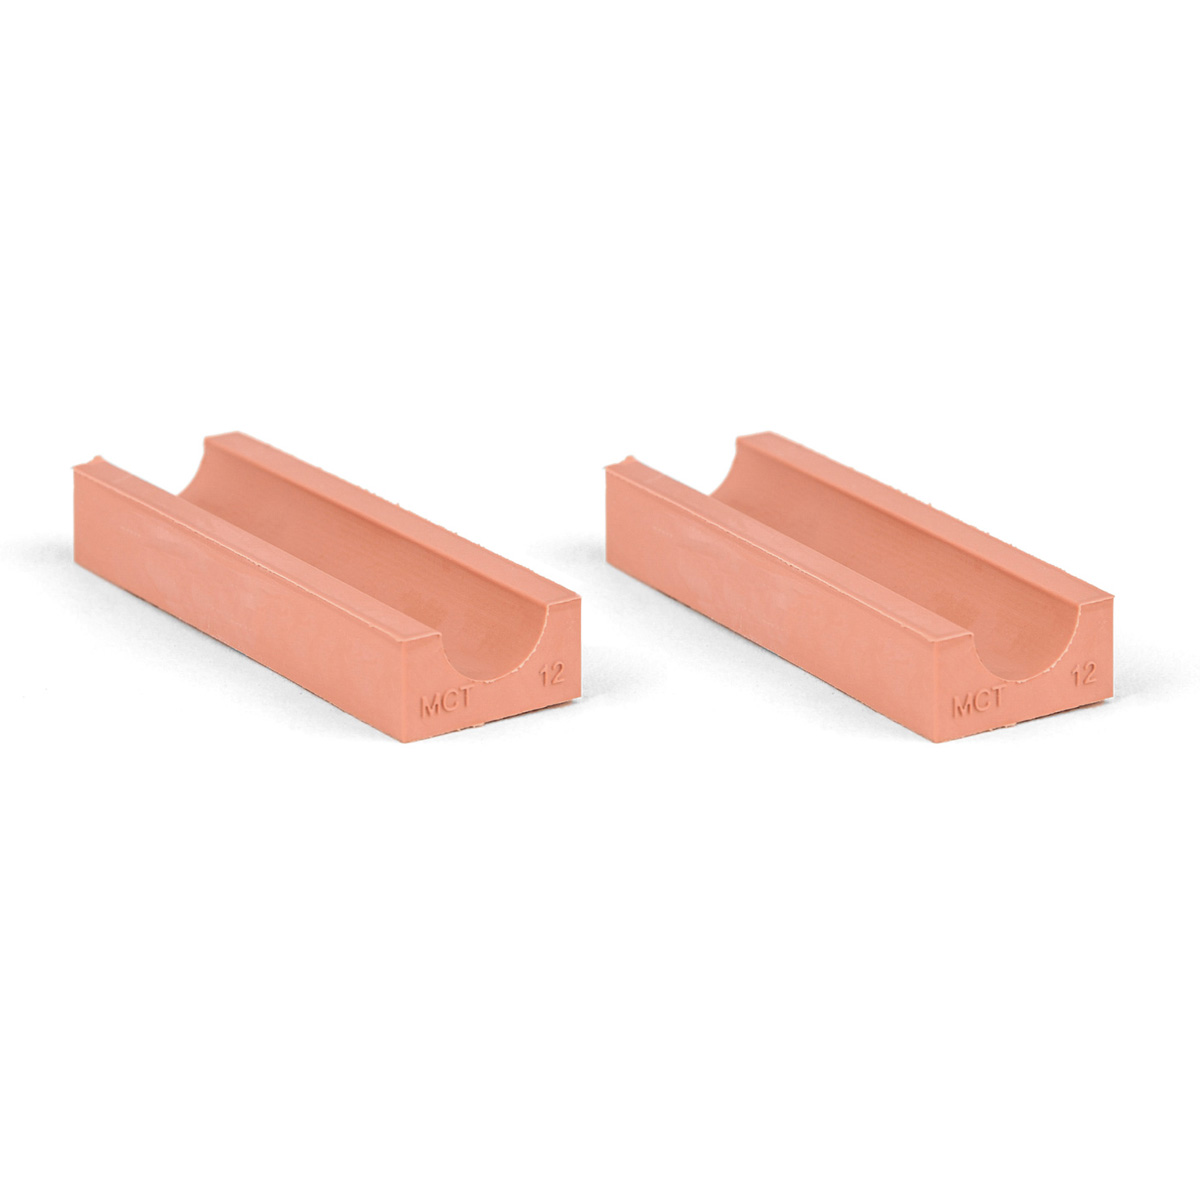 20-12*2 Set of 2 half insert block lycron, 20-12 for cable/pipe diam. 11.5-12.5mm